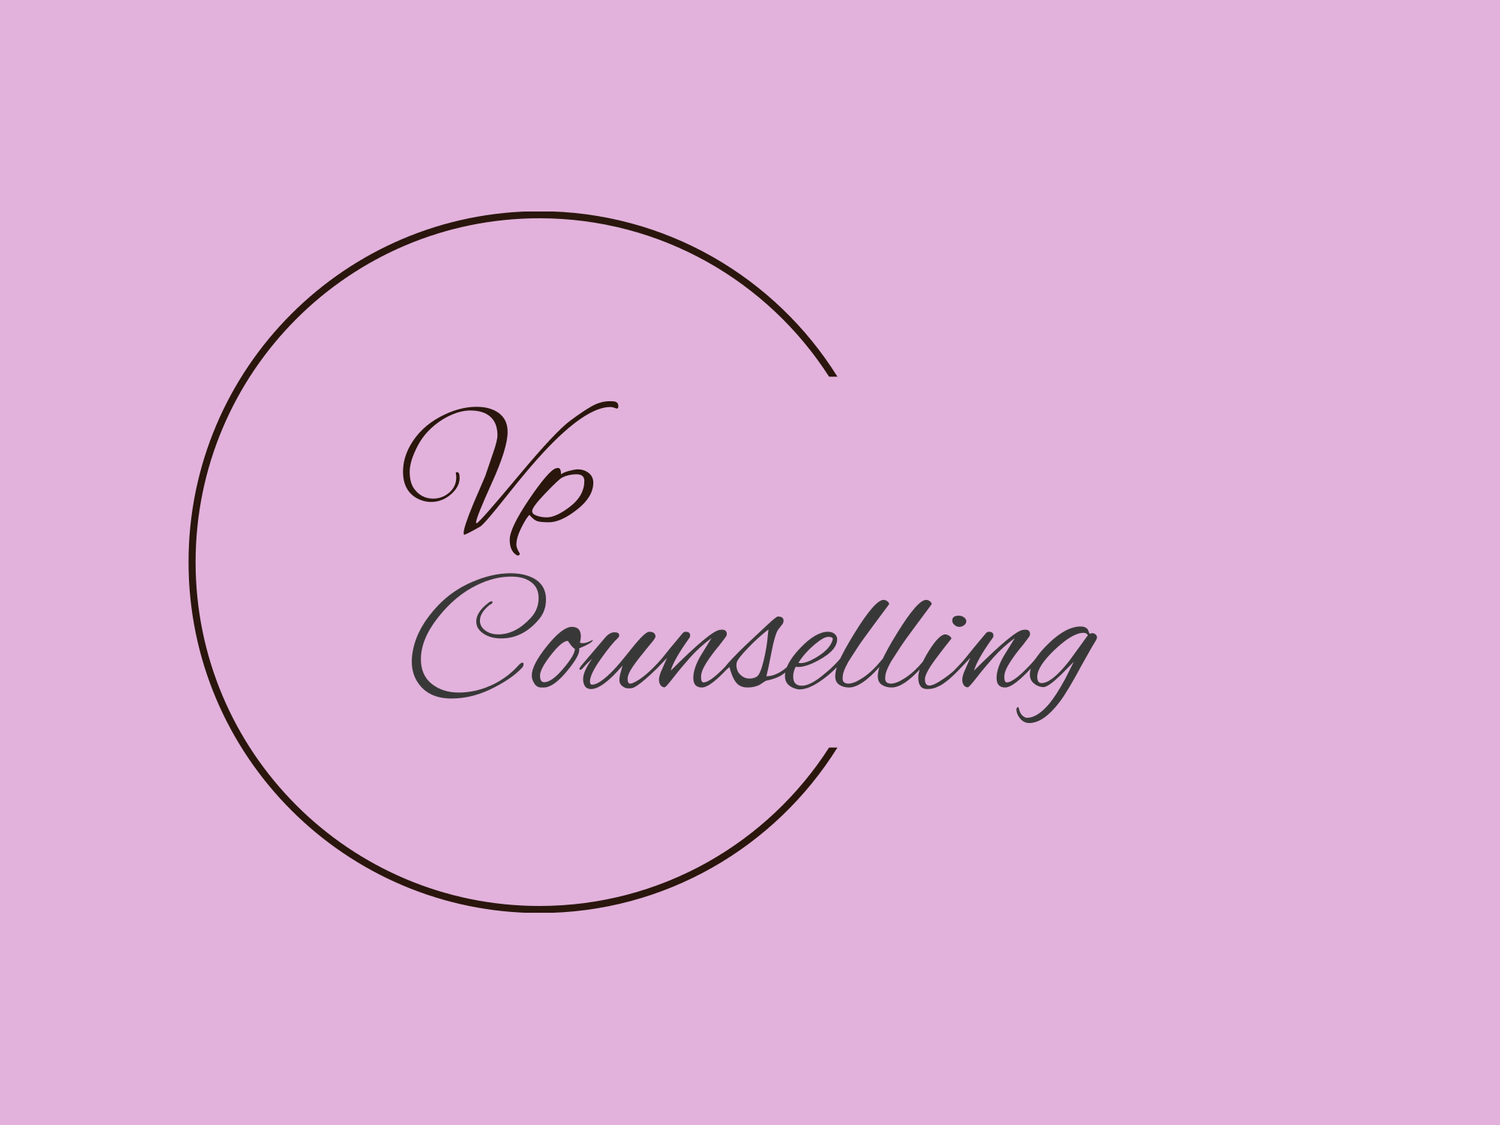 Vp Counselling